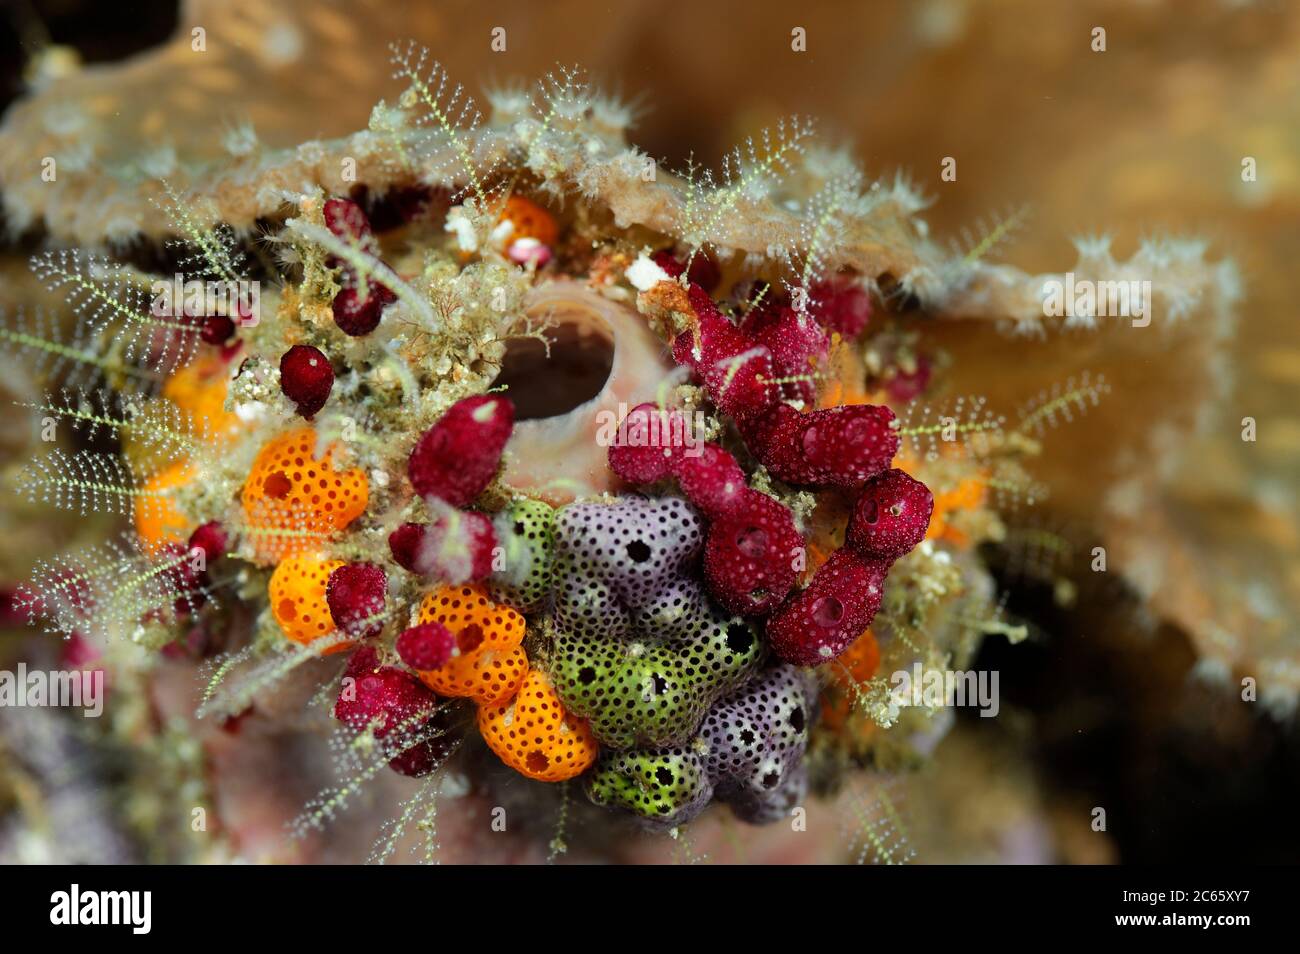 Cluster of colourful Sea Tunicates. Strawberry Tunicates (Didemnid sp.) Raja Ampat, West Papua, Indonesia, Pacific Ocean [size of single organism: 3 cm] Stock Photo